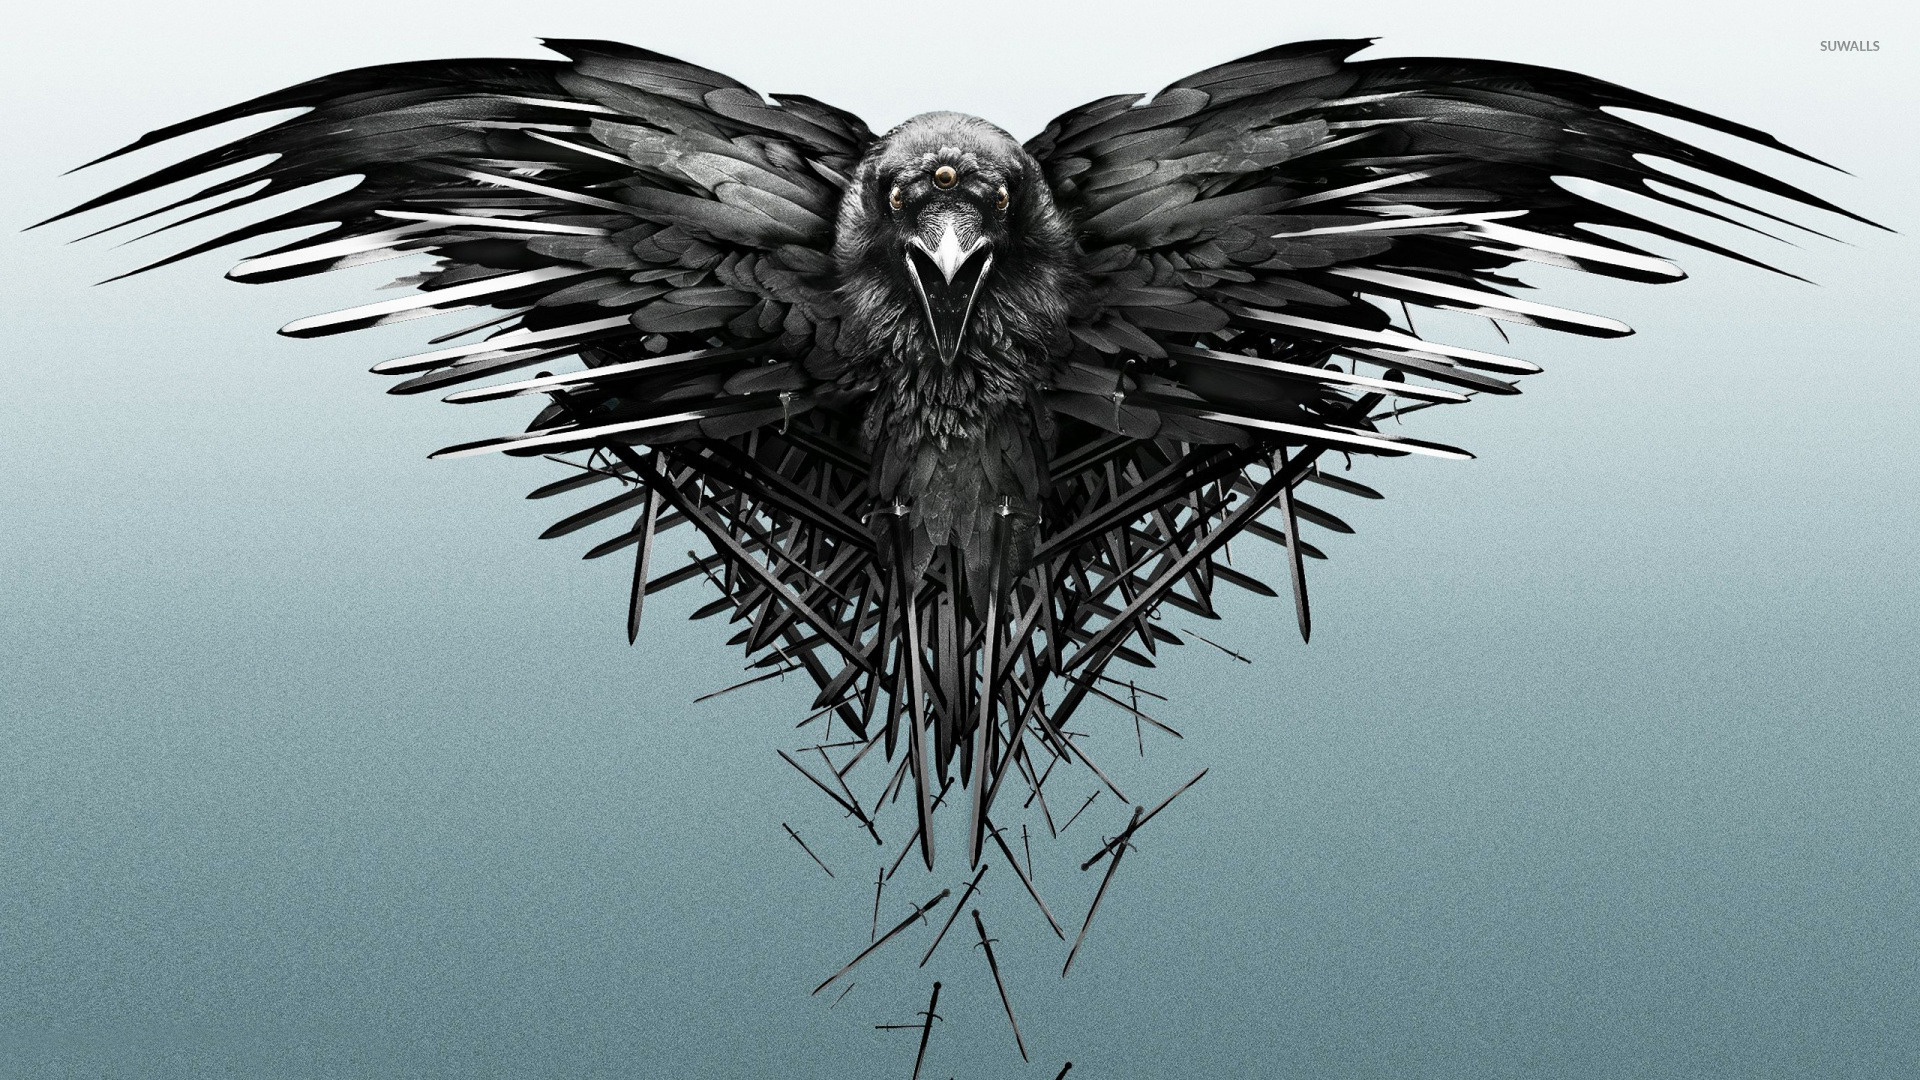 A4 A3 A2 A1 A0| Game of Thrones Raven TV Series Poster Print T108 